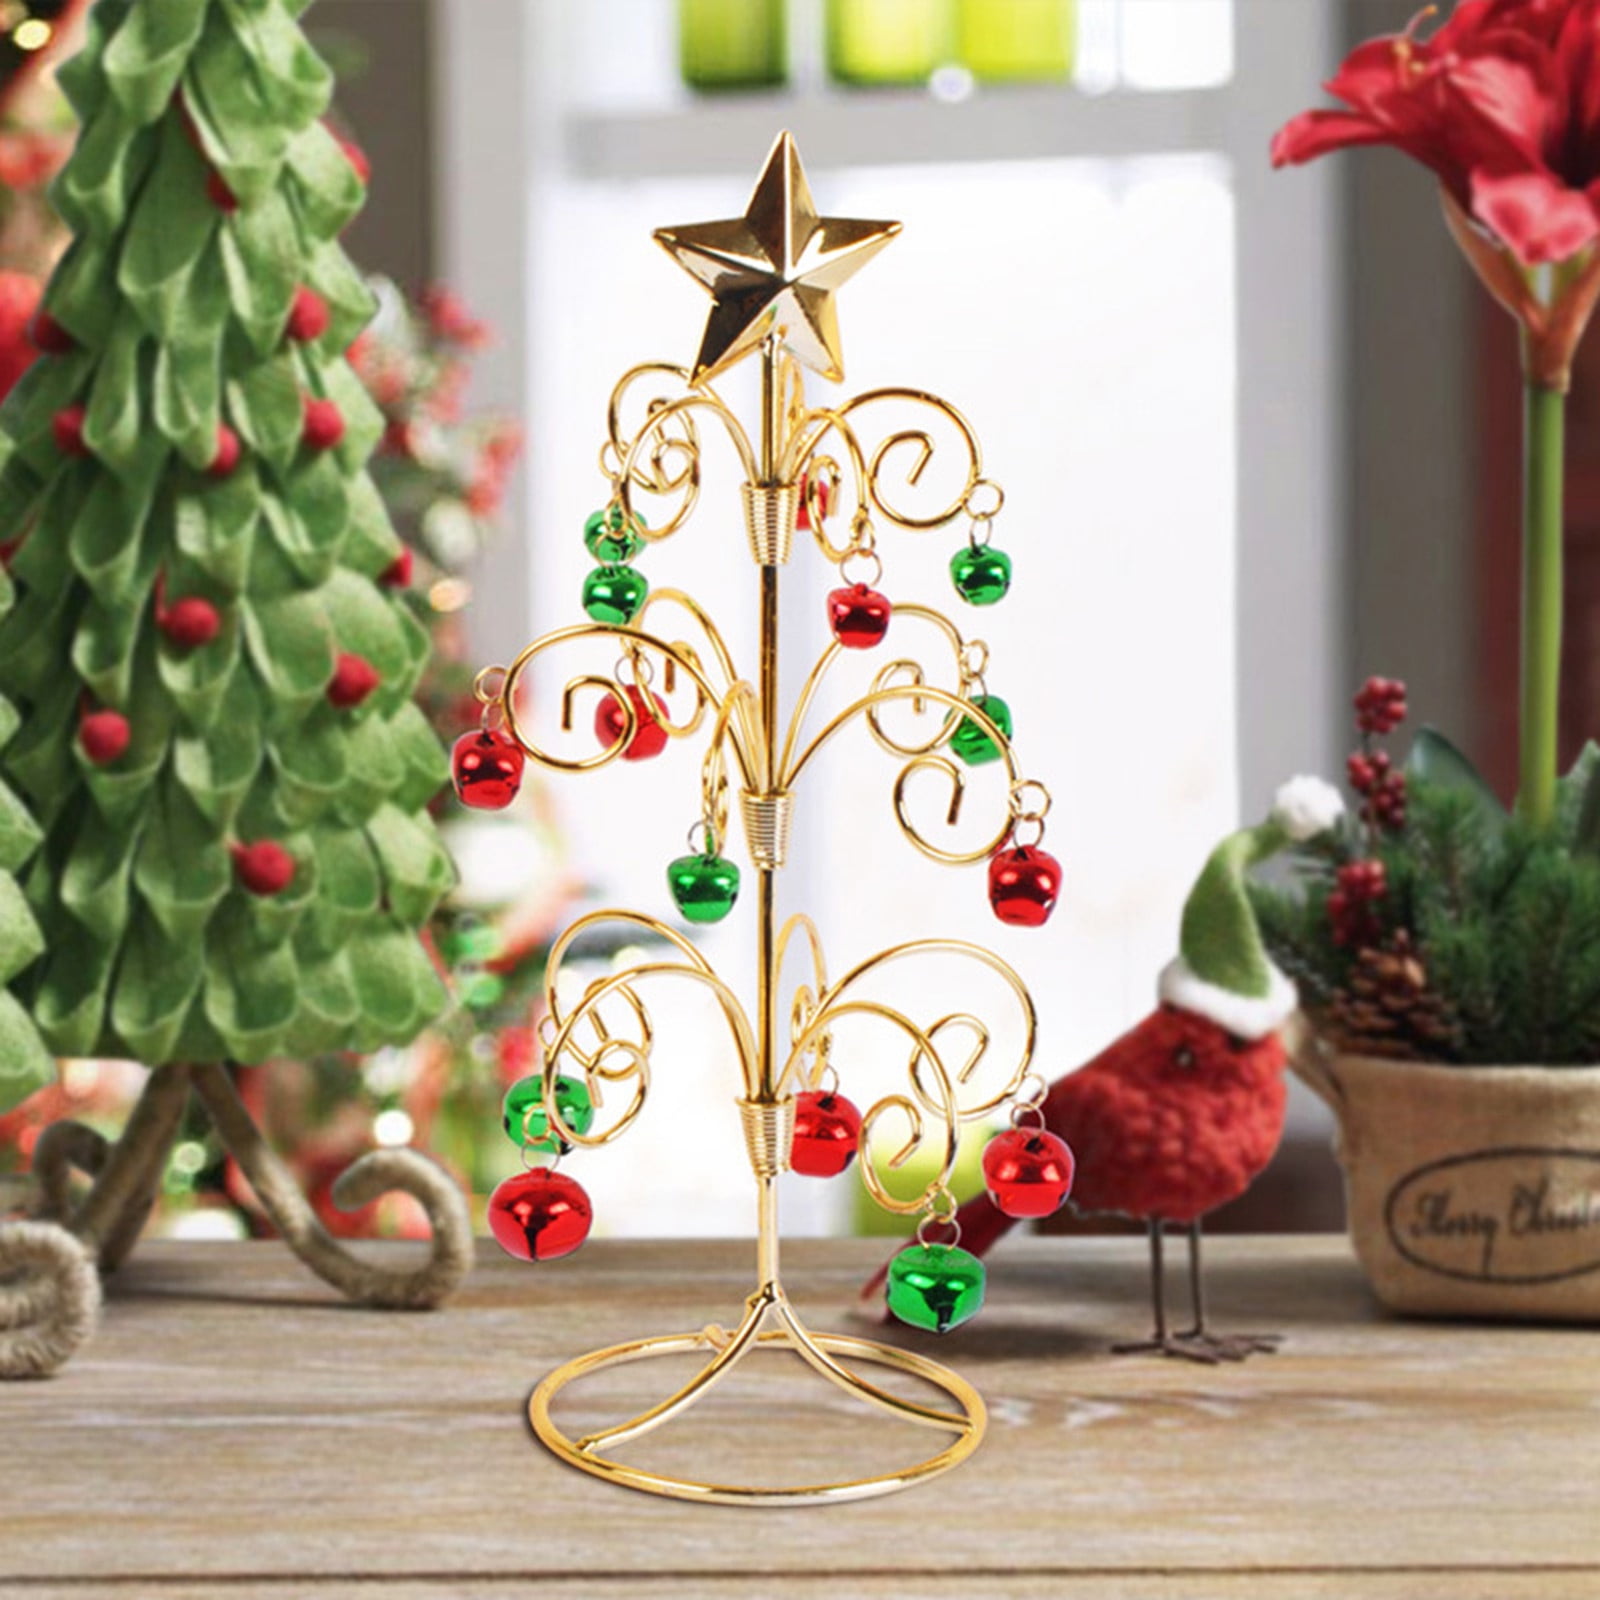 Discounted holiday decorations